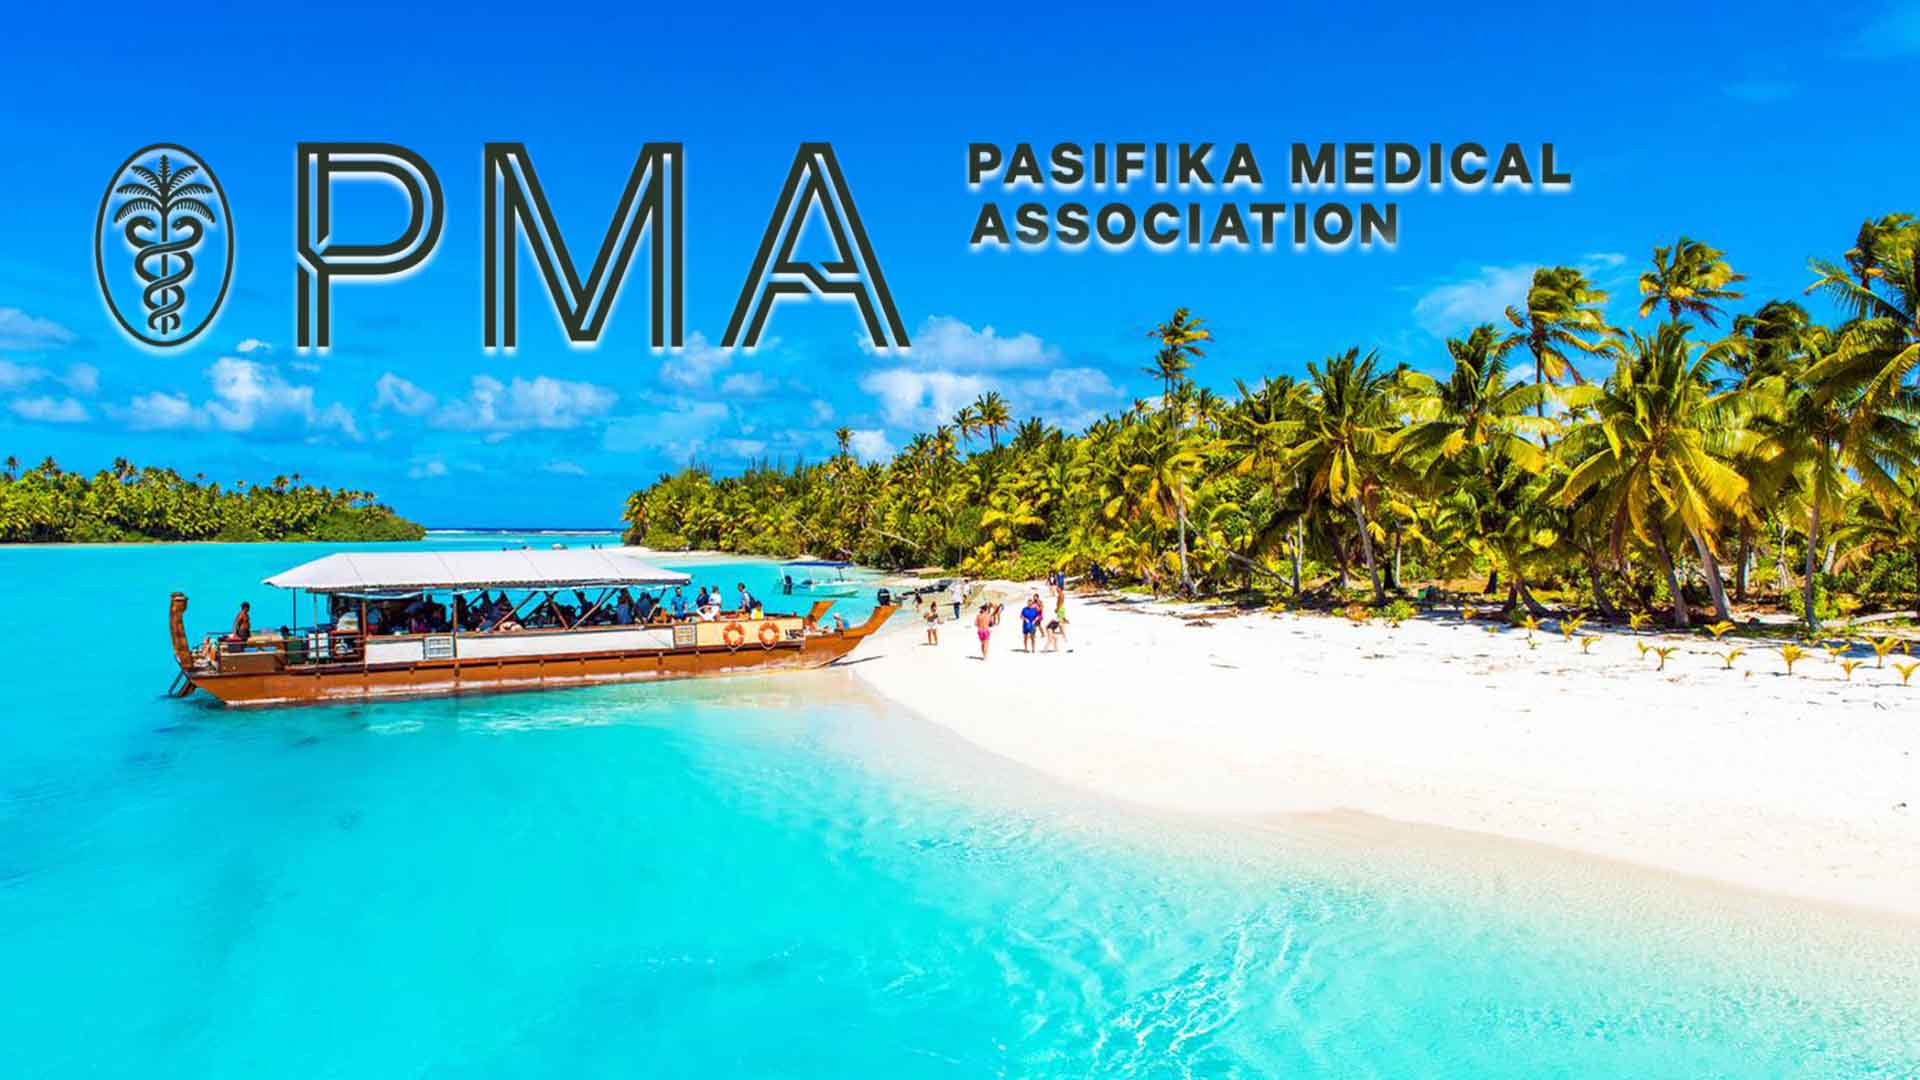 Annual Pasifika Medical Association conference to take place in…